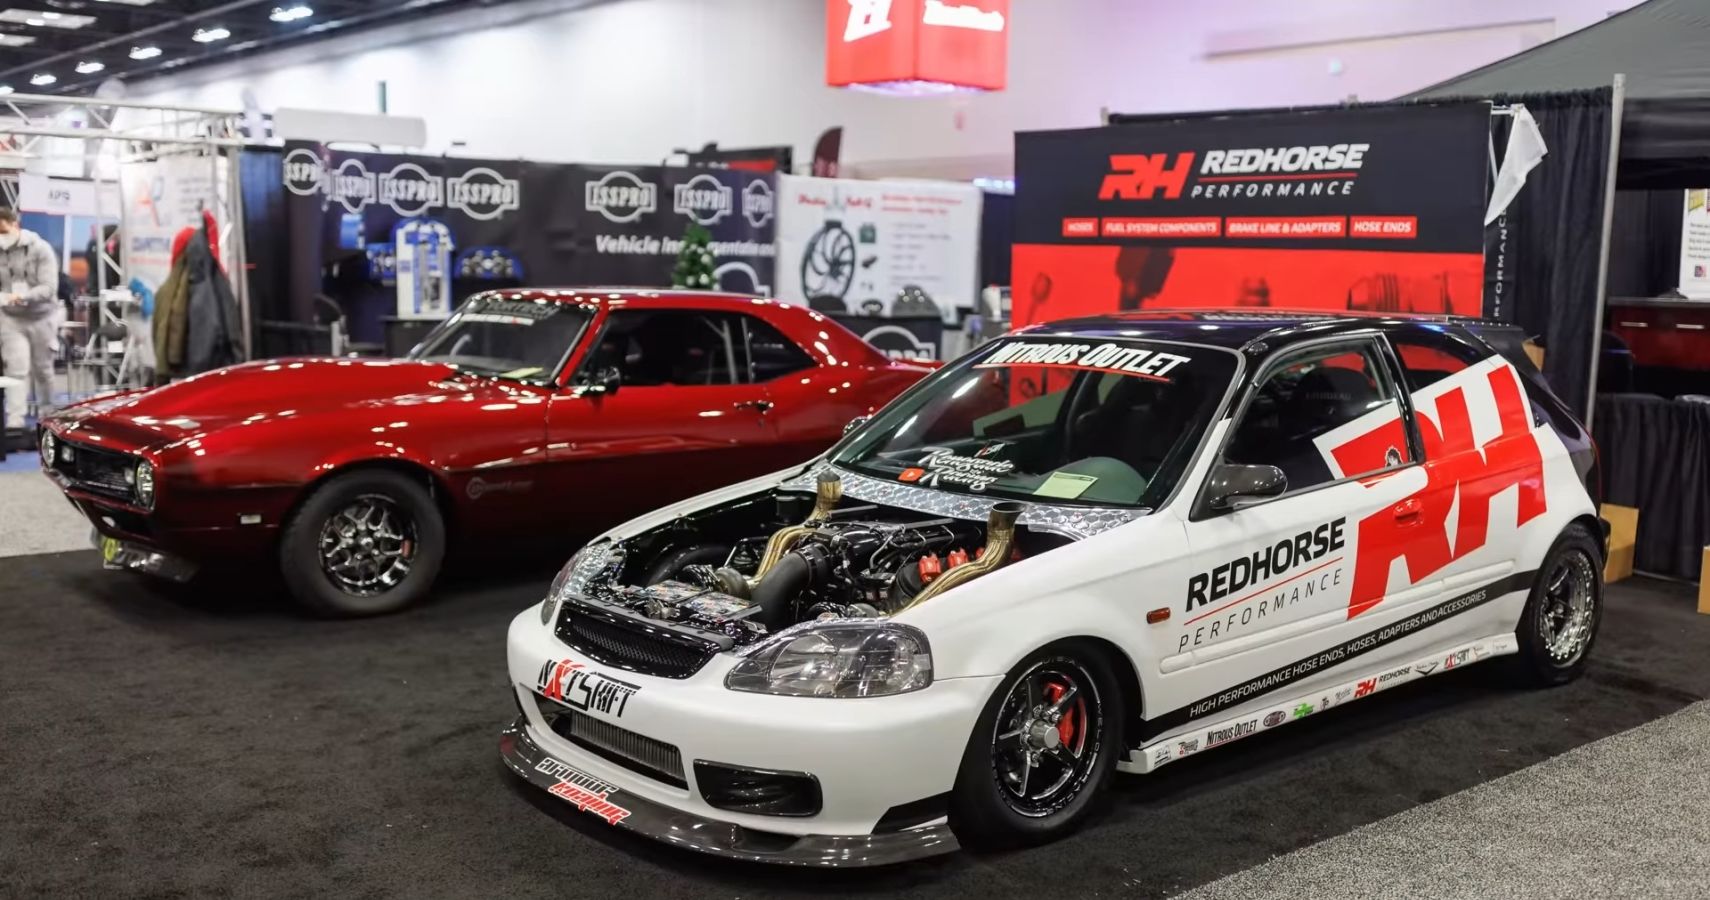 2000 Hp Civic Featured Image